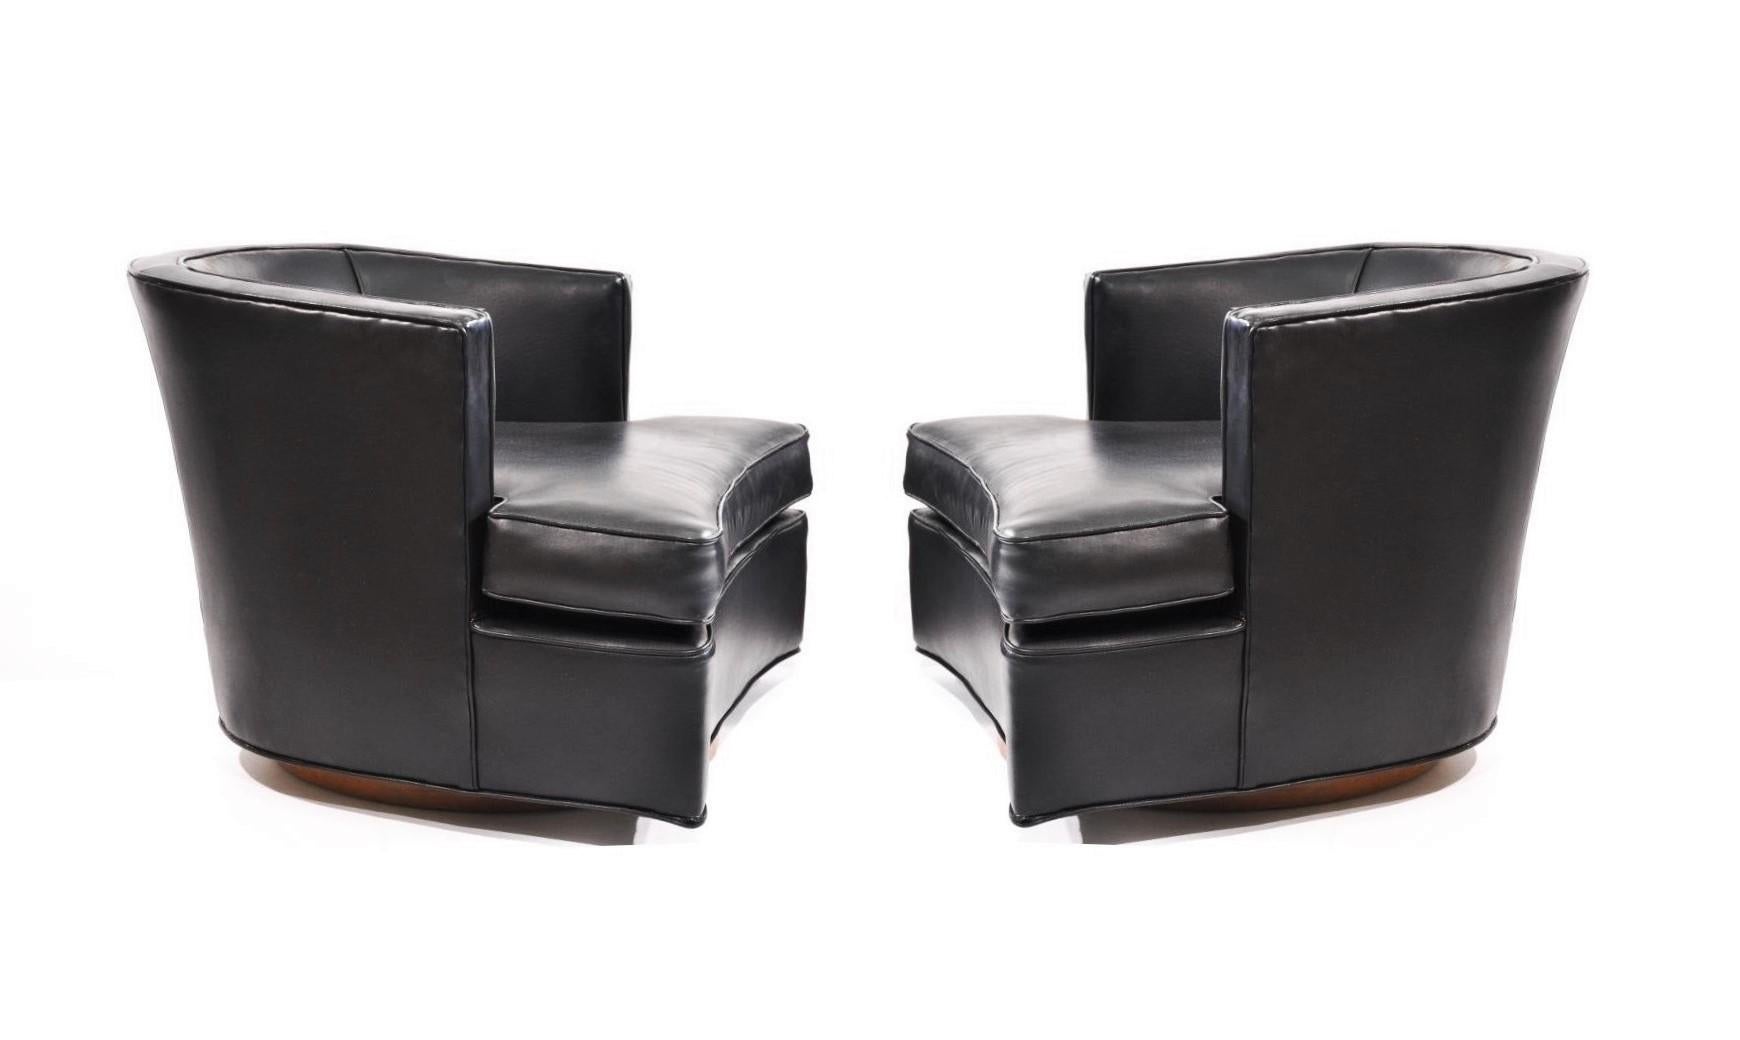 Mid-Century Modern comfortable pair of swiveling lounge chairs designed by Harvey Probber, Model 303A. The chairs professionally re-covered in a black leatherette upholstery with decorative nails lining the corners on swivel bases in oakwood.